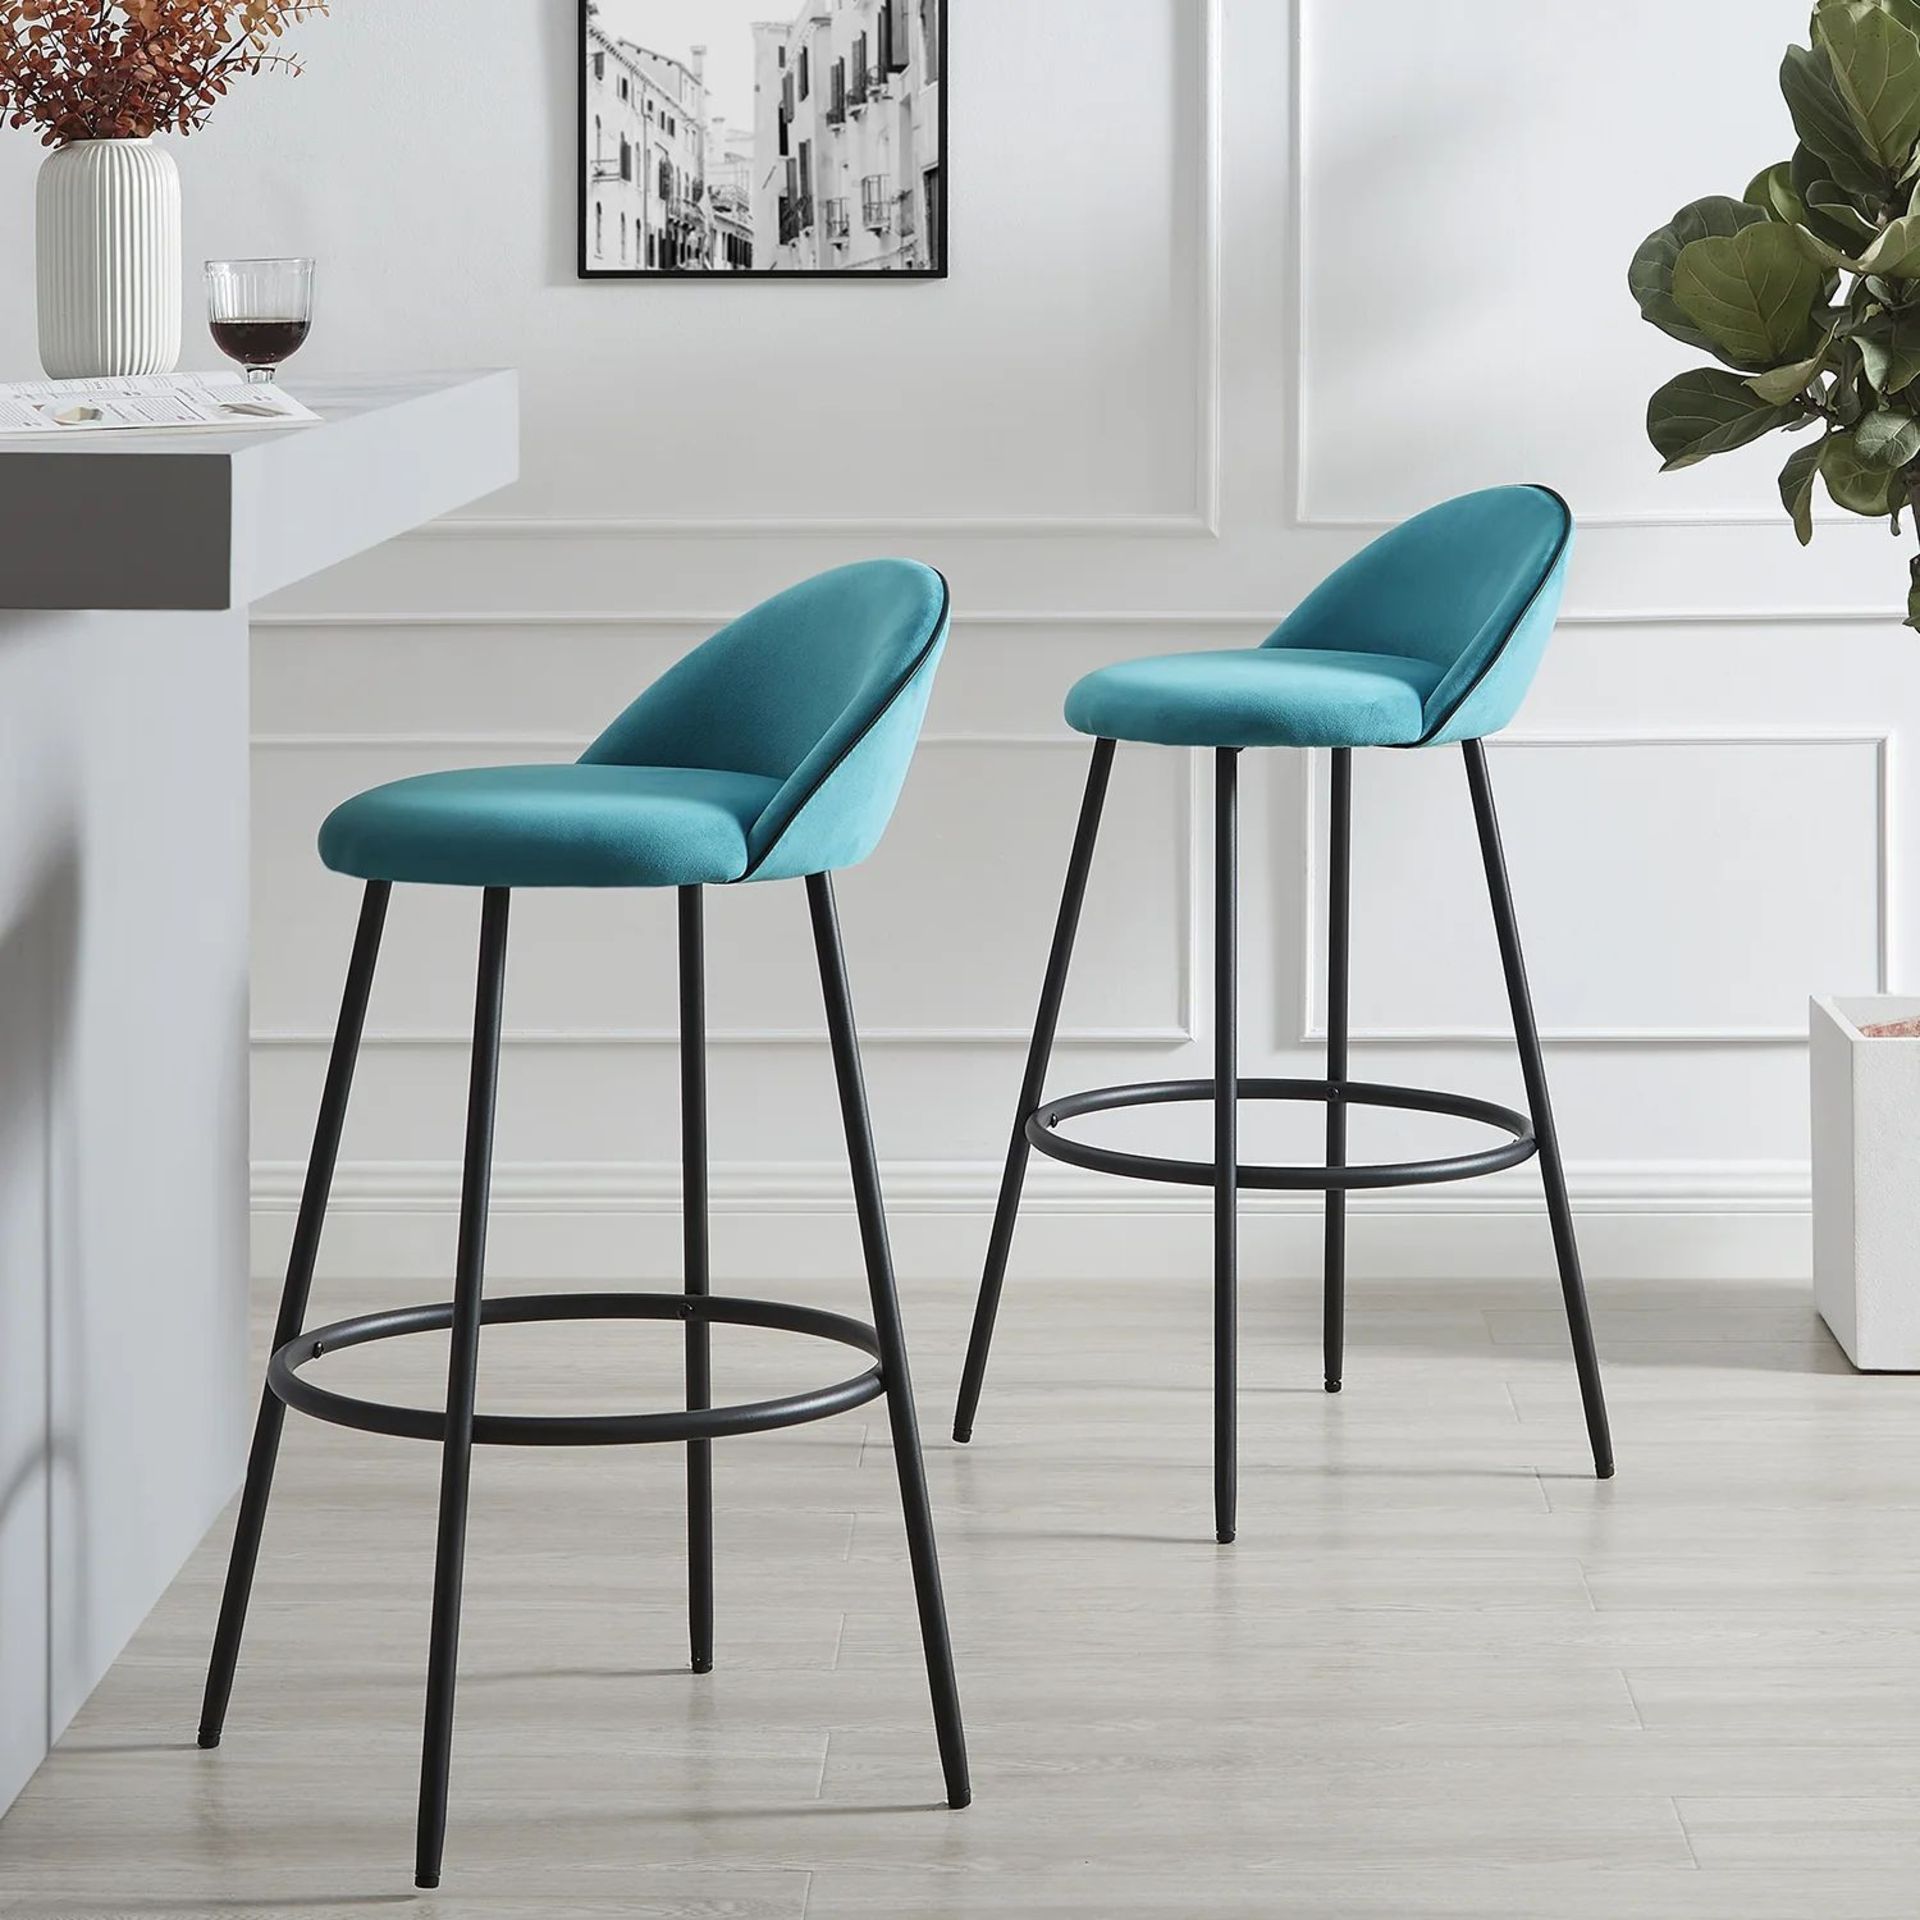 Barton Set of 2 Blue Velvet Upholstered Bar Stools with Contrast Piping. - R14. RRP £199.99. Our - Image 2 of 2